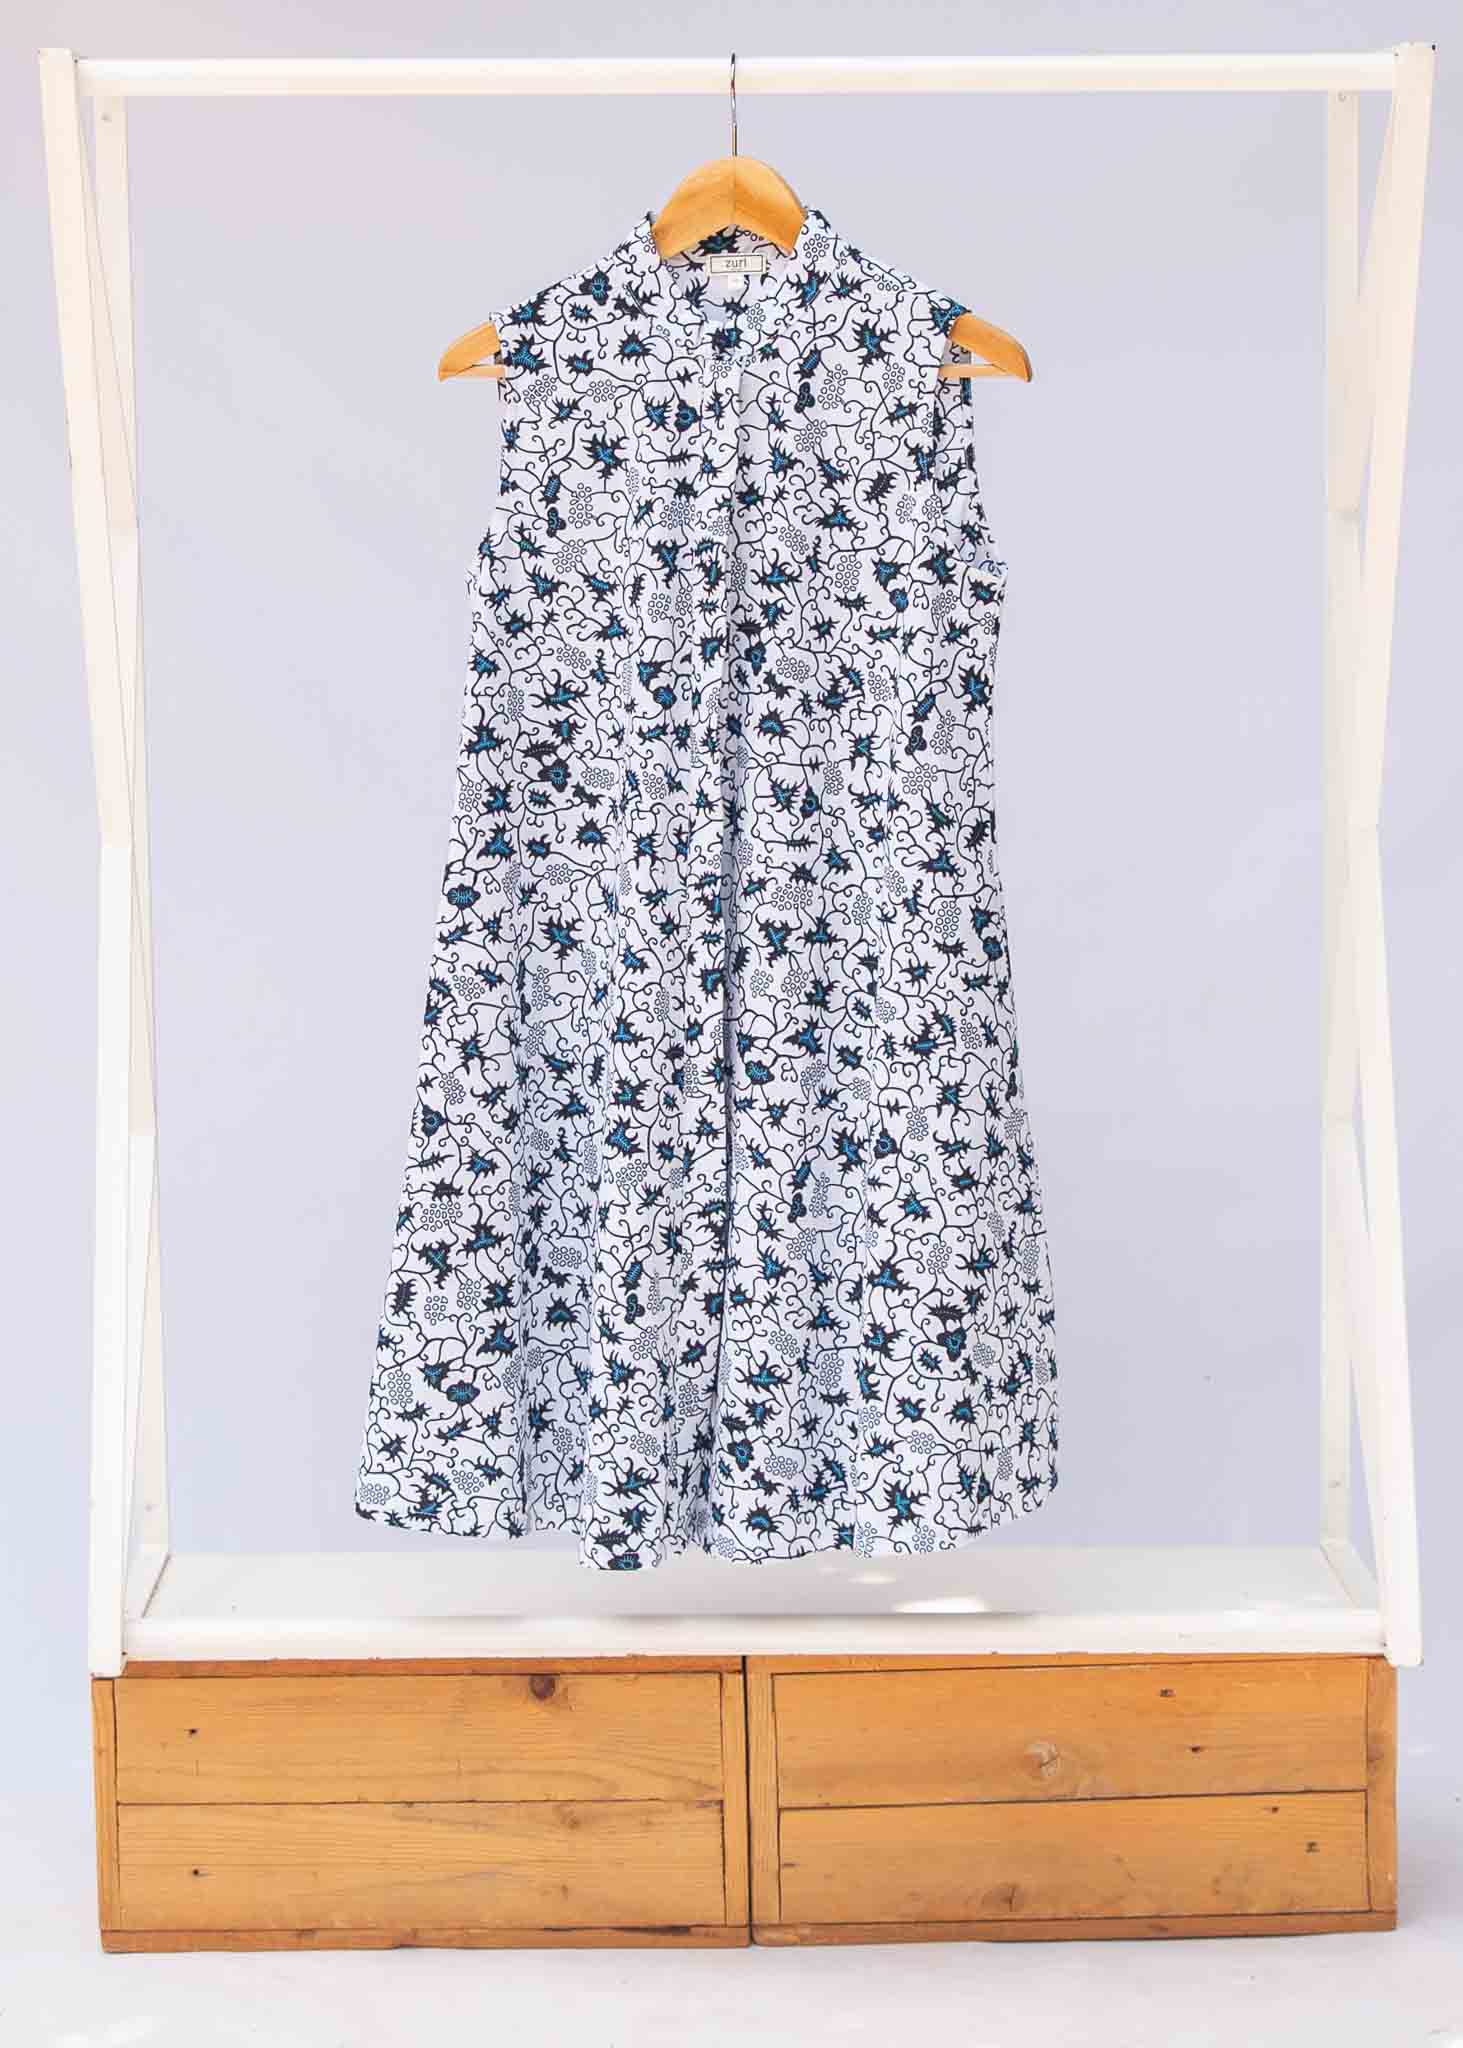 Display of white sleeveless dress with blue floral print.